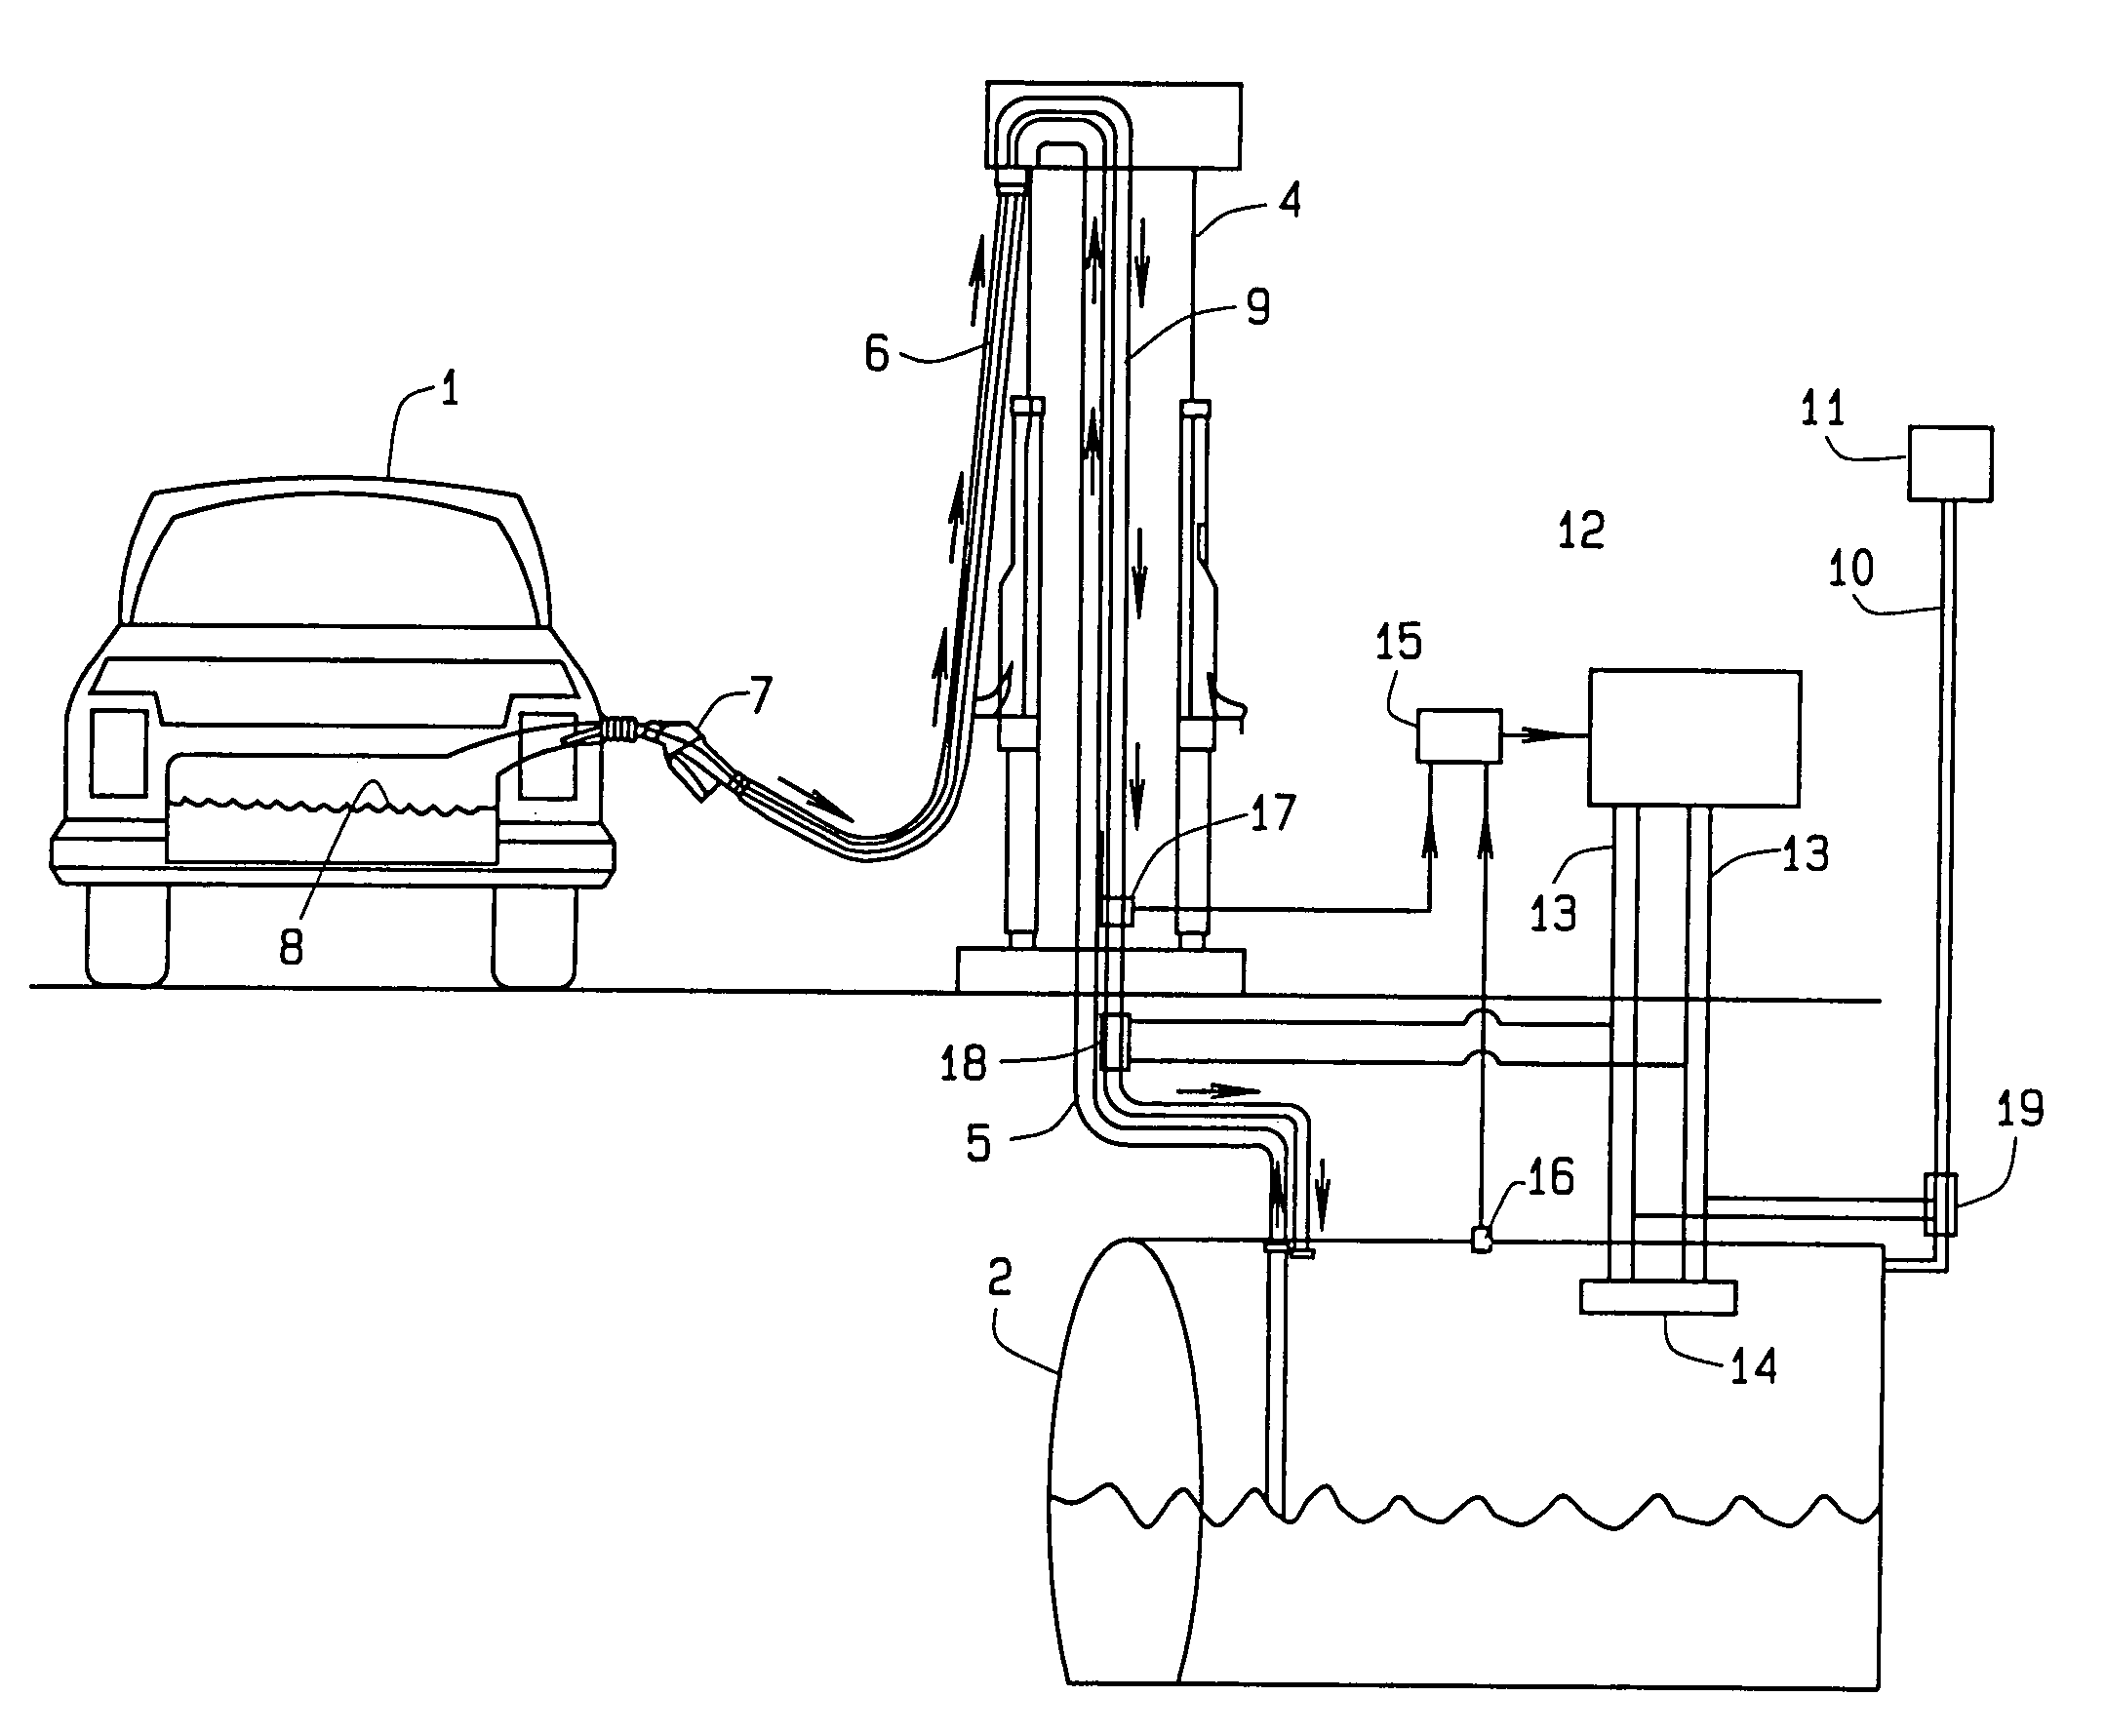 Enthalpy extractor for hydrocarbon vapors